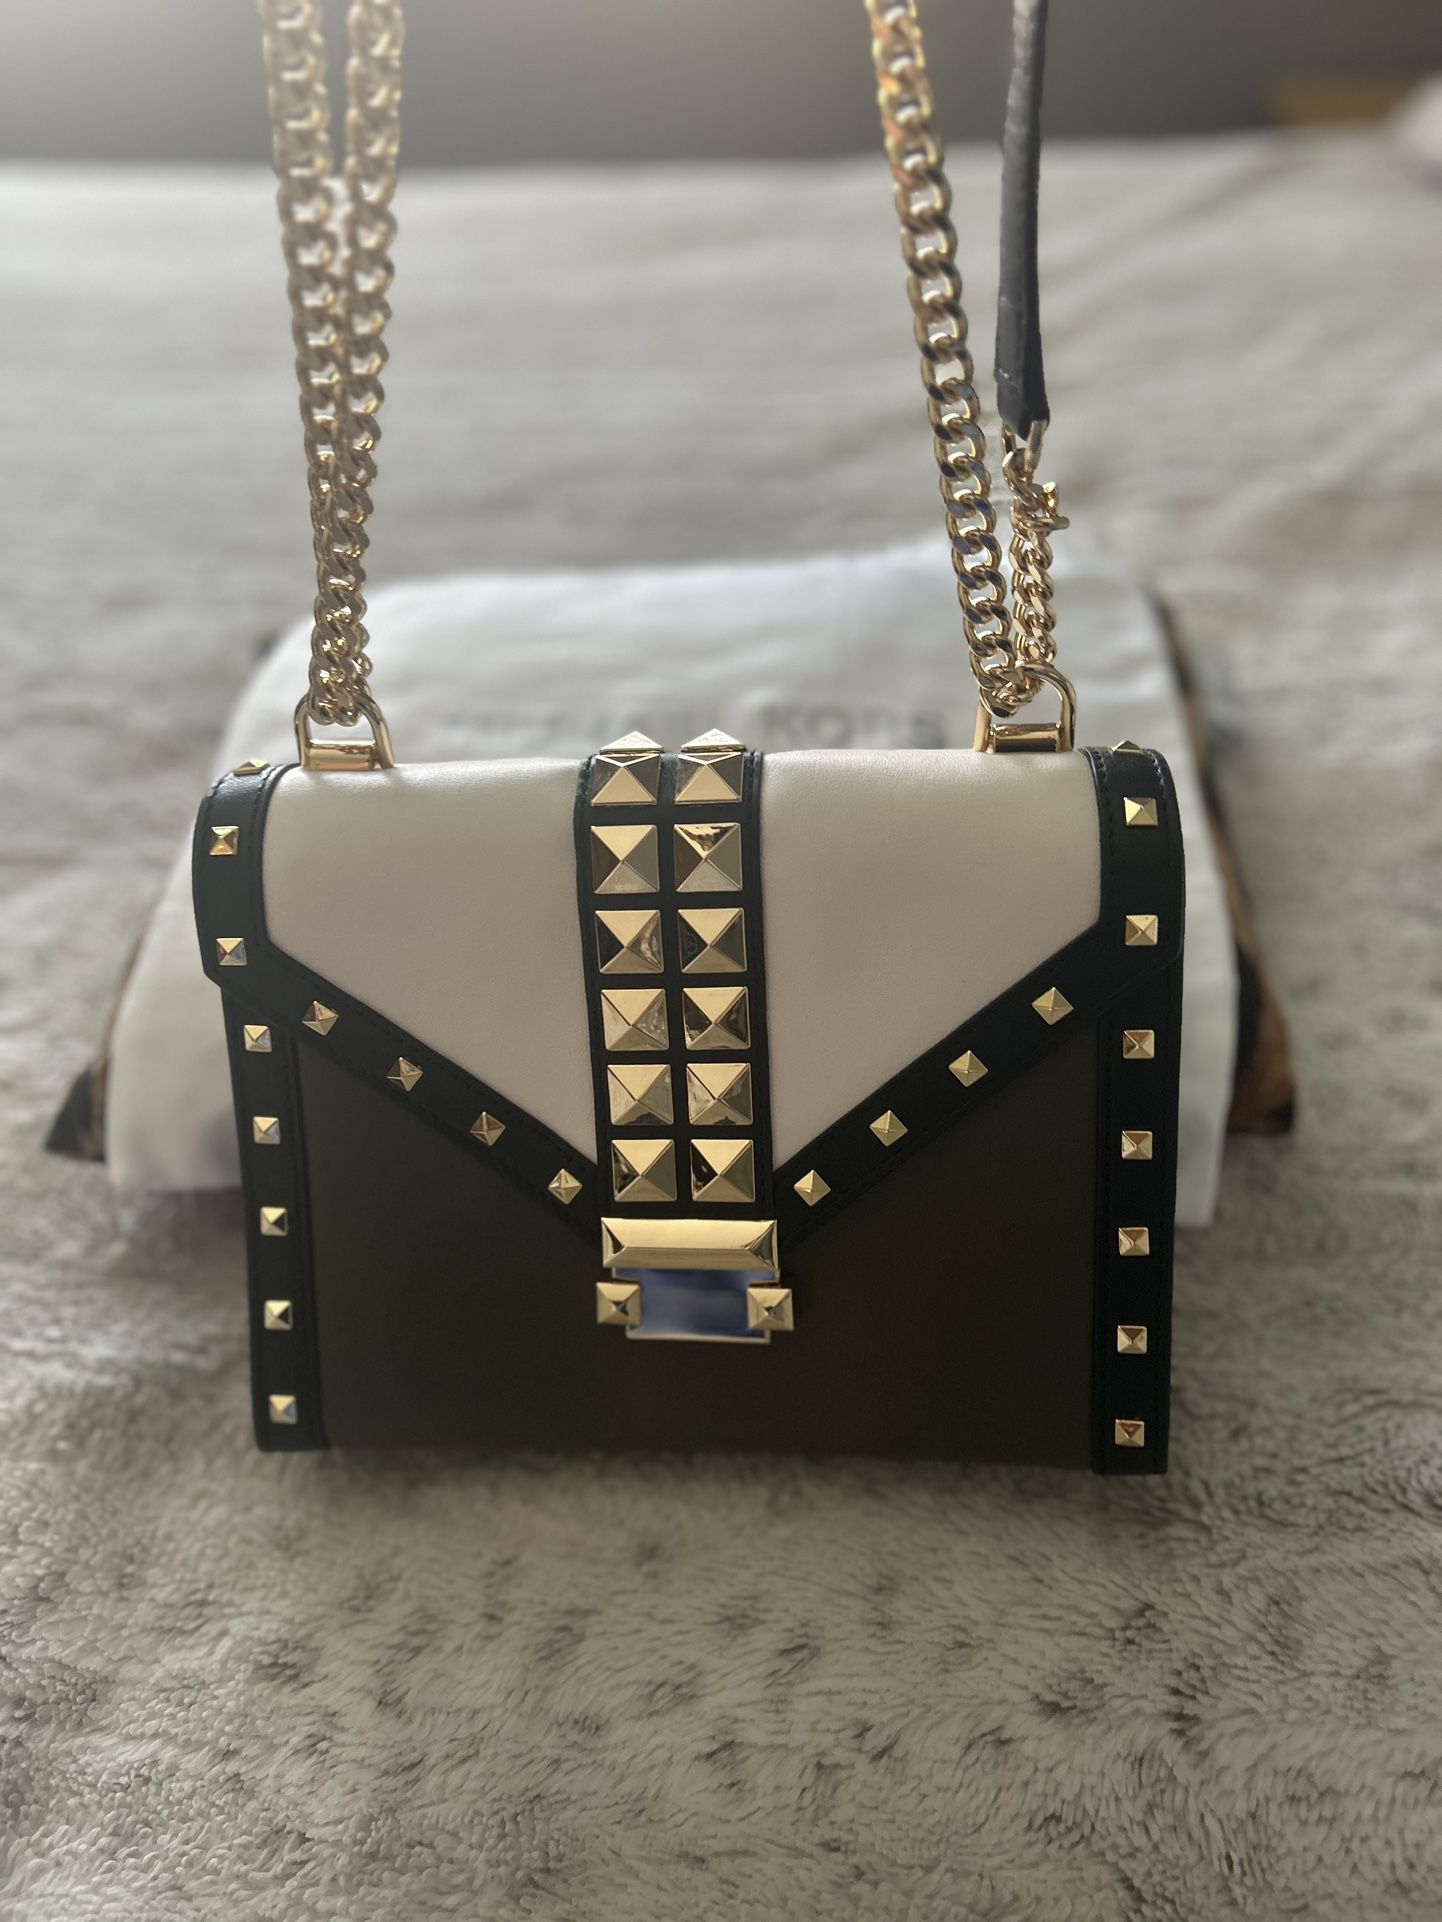 New Authentic Michael Kors Studded Crossbag